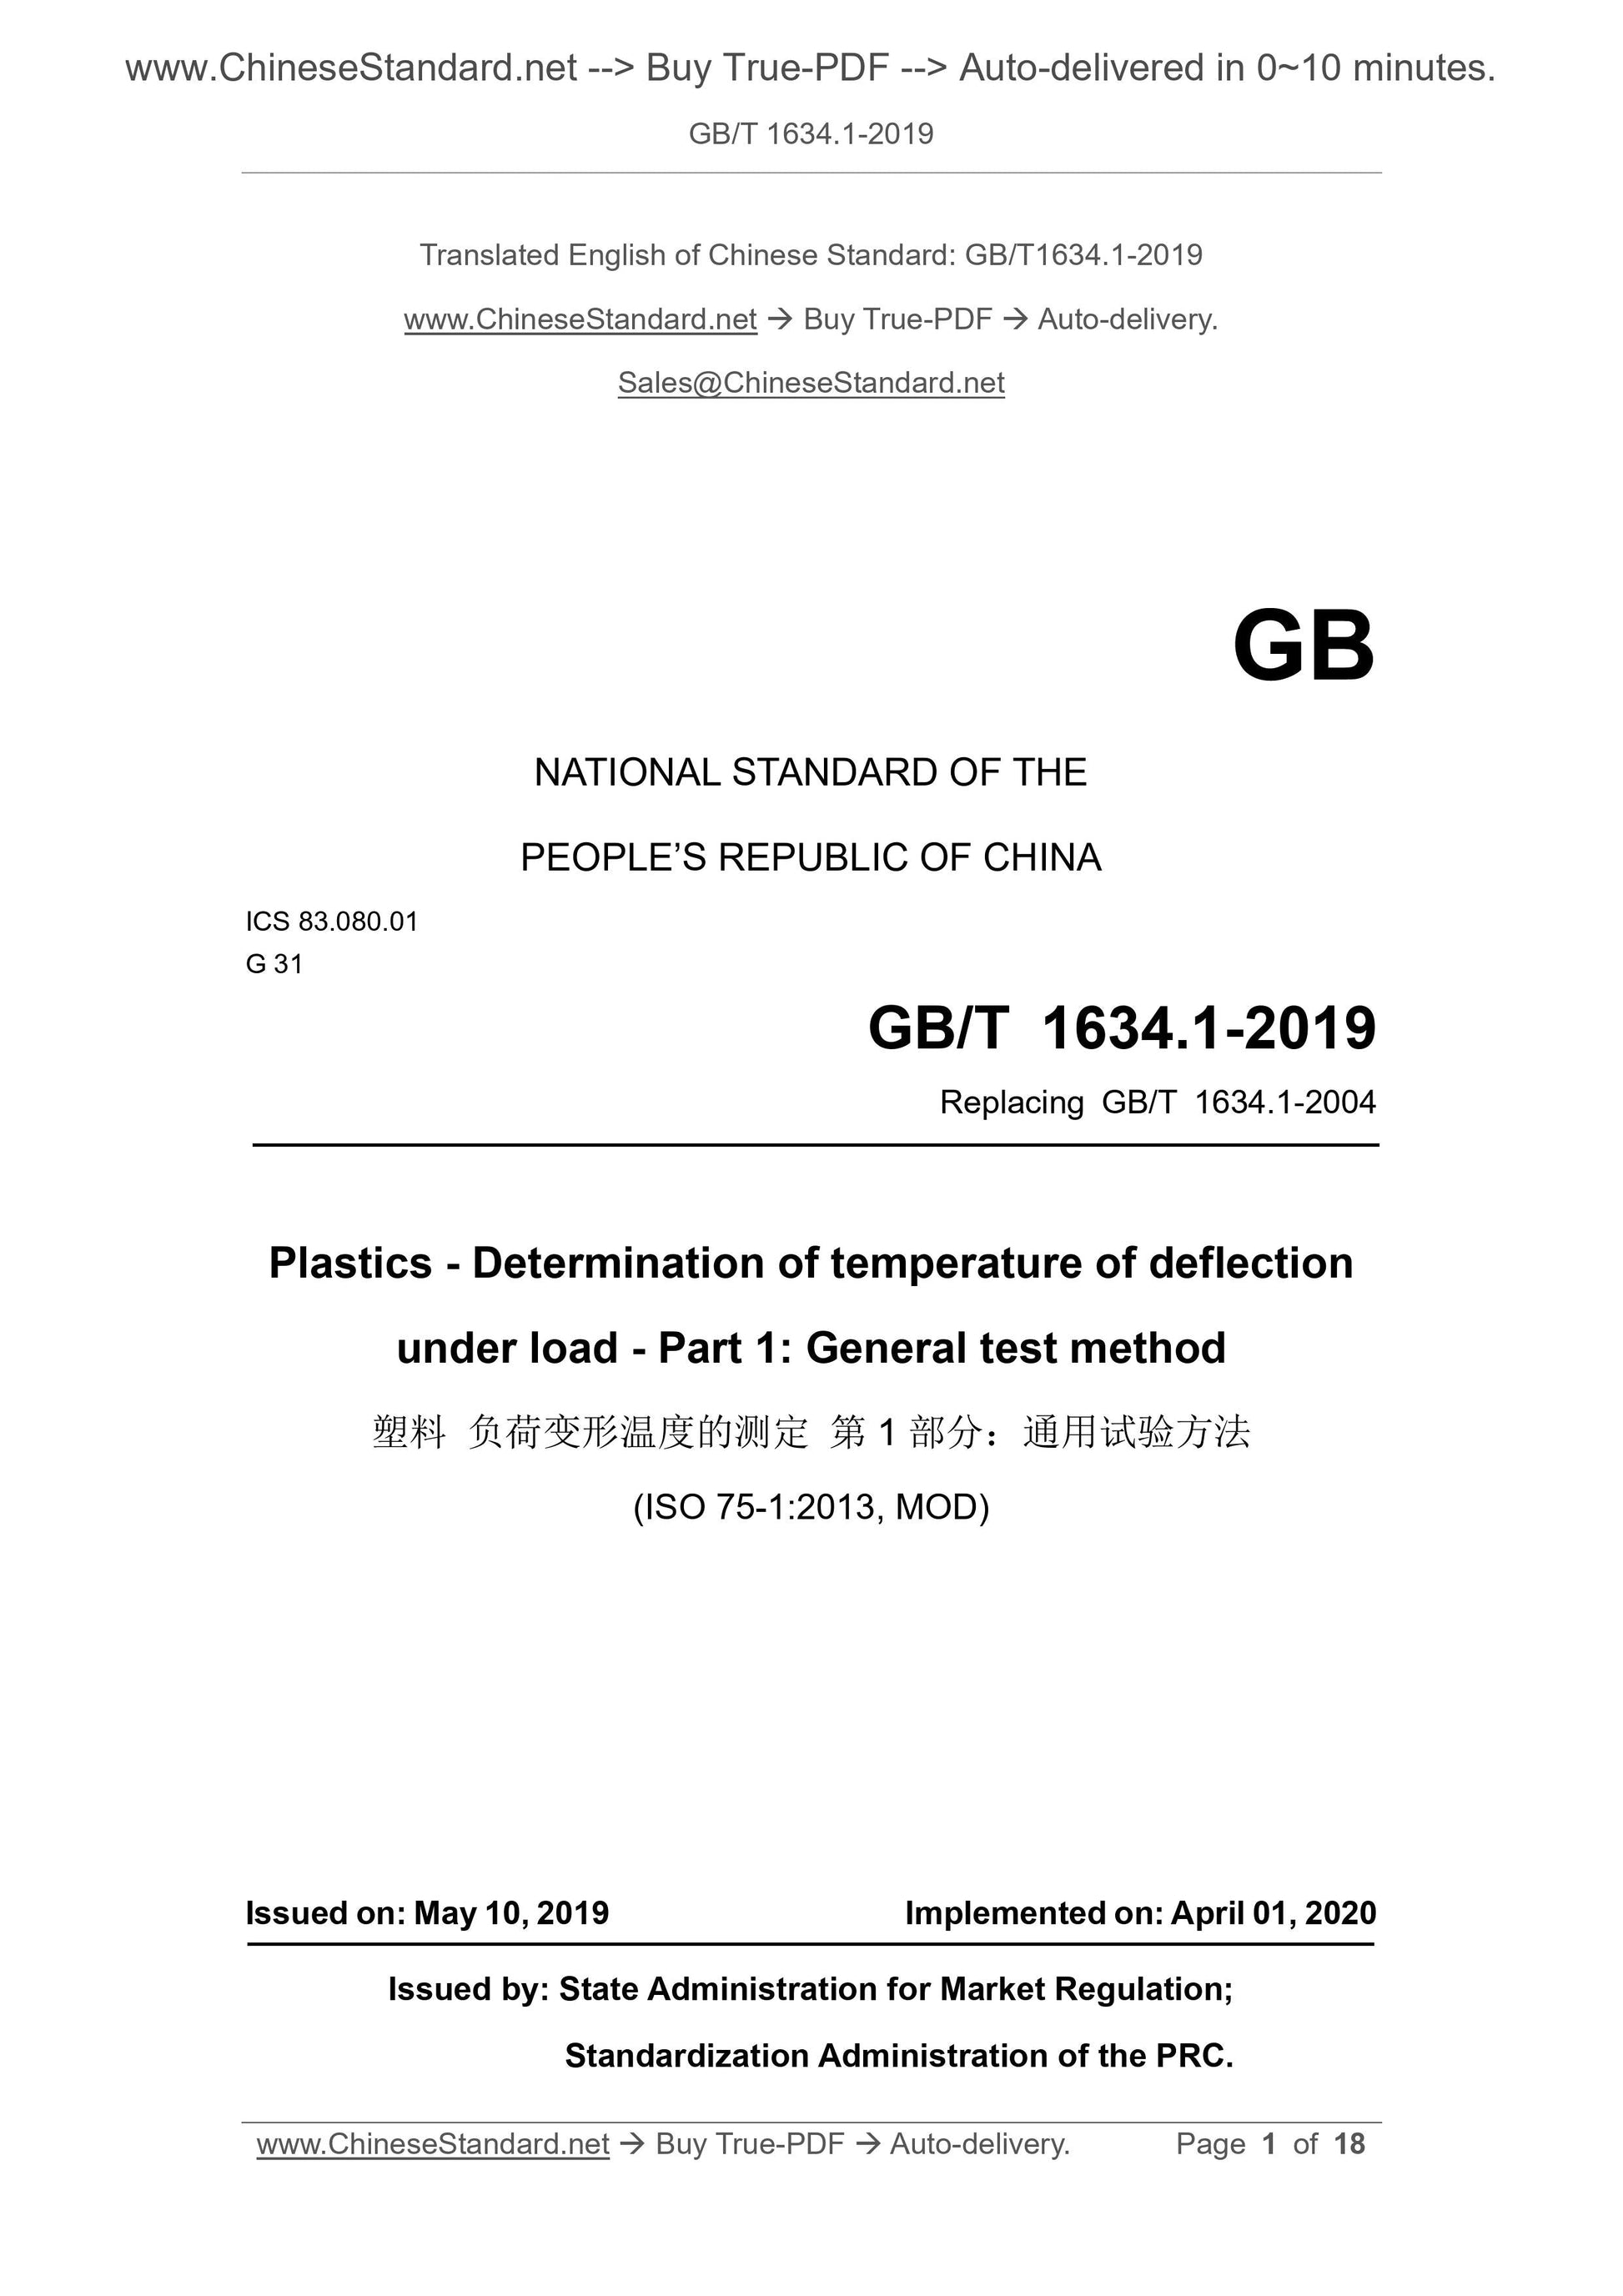 GB/T 1634.1-2019 Page 1